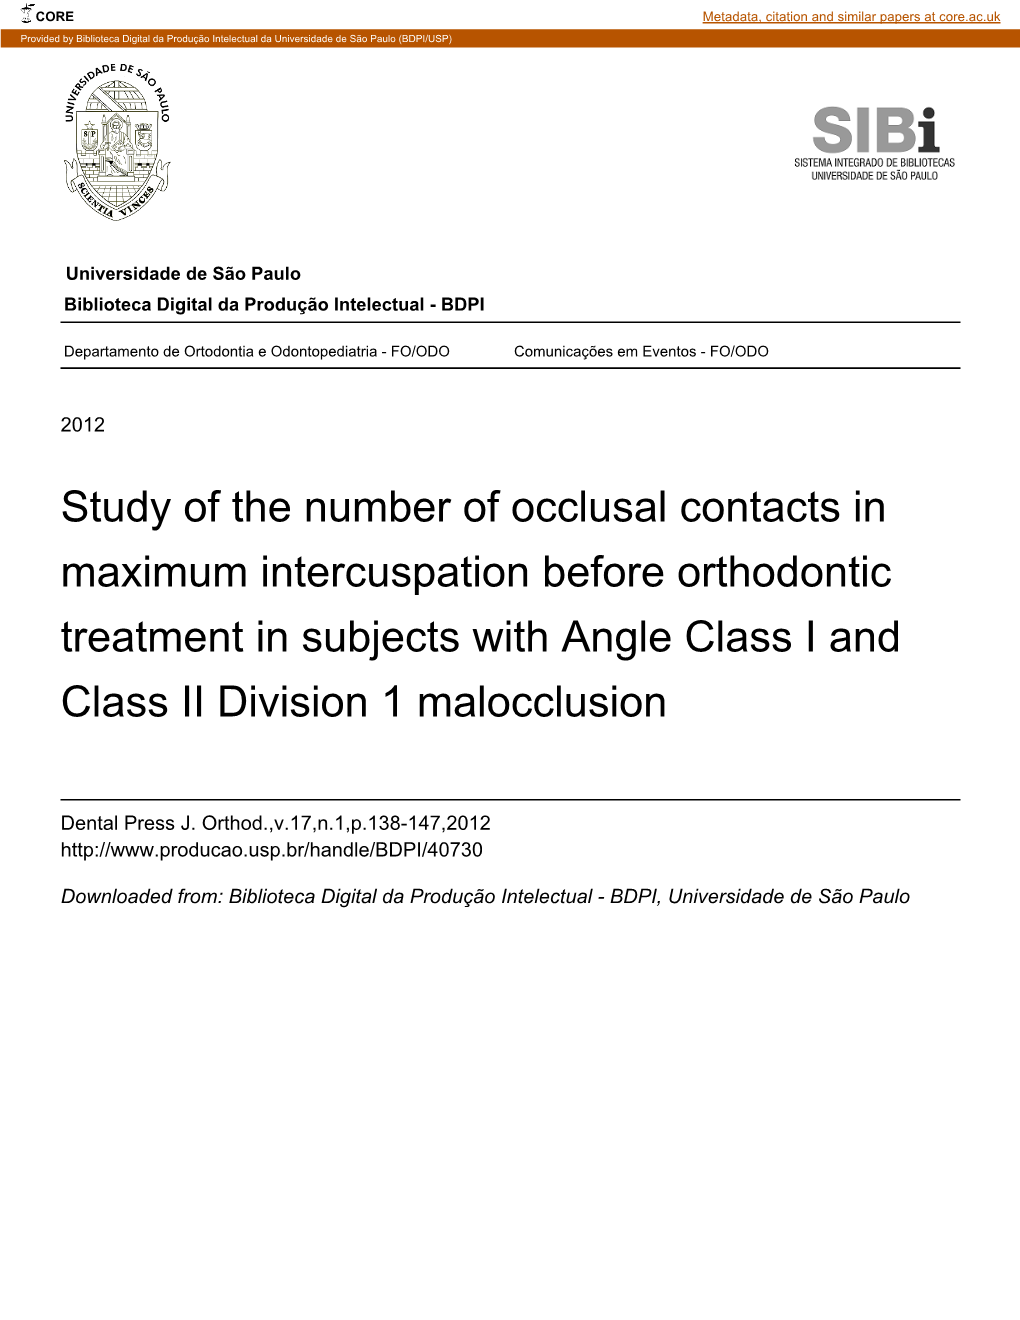 Study of the Number of Occlusal Contacts in Maximum Intercuspation Before Orthodontic Treatment in Subjects with Angle Class I and Class II Division 1 Malocclusion